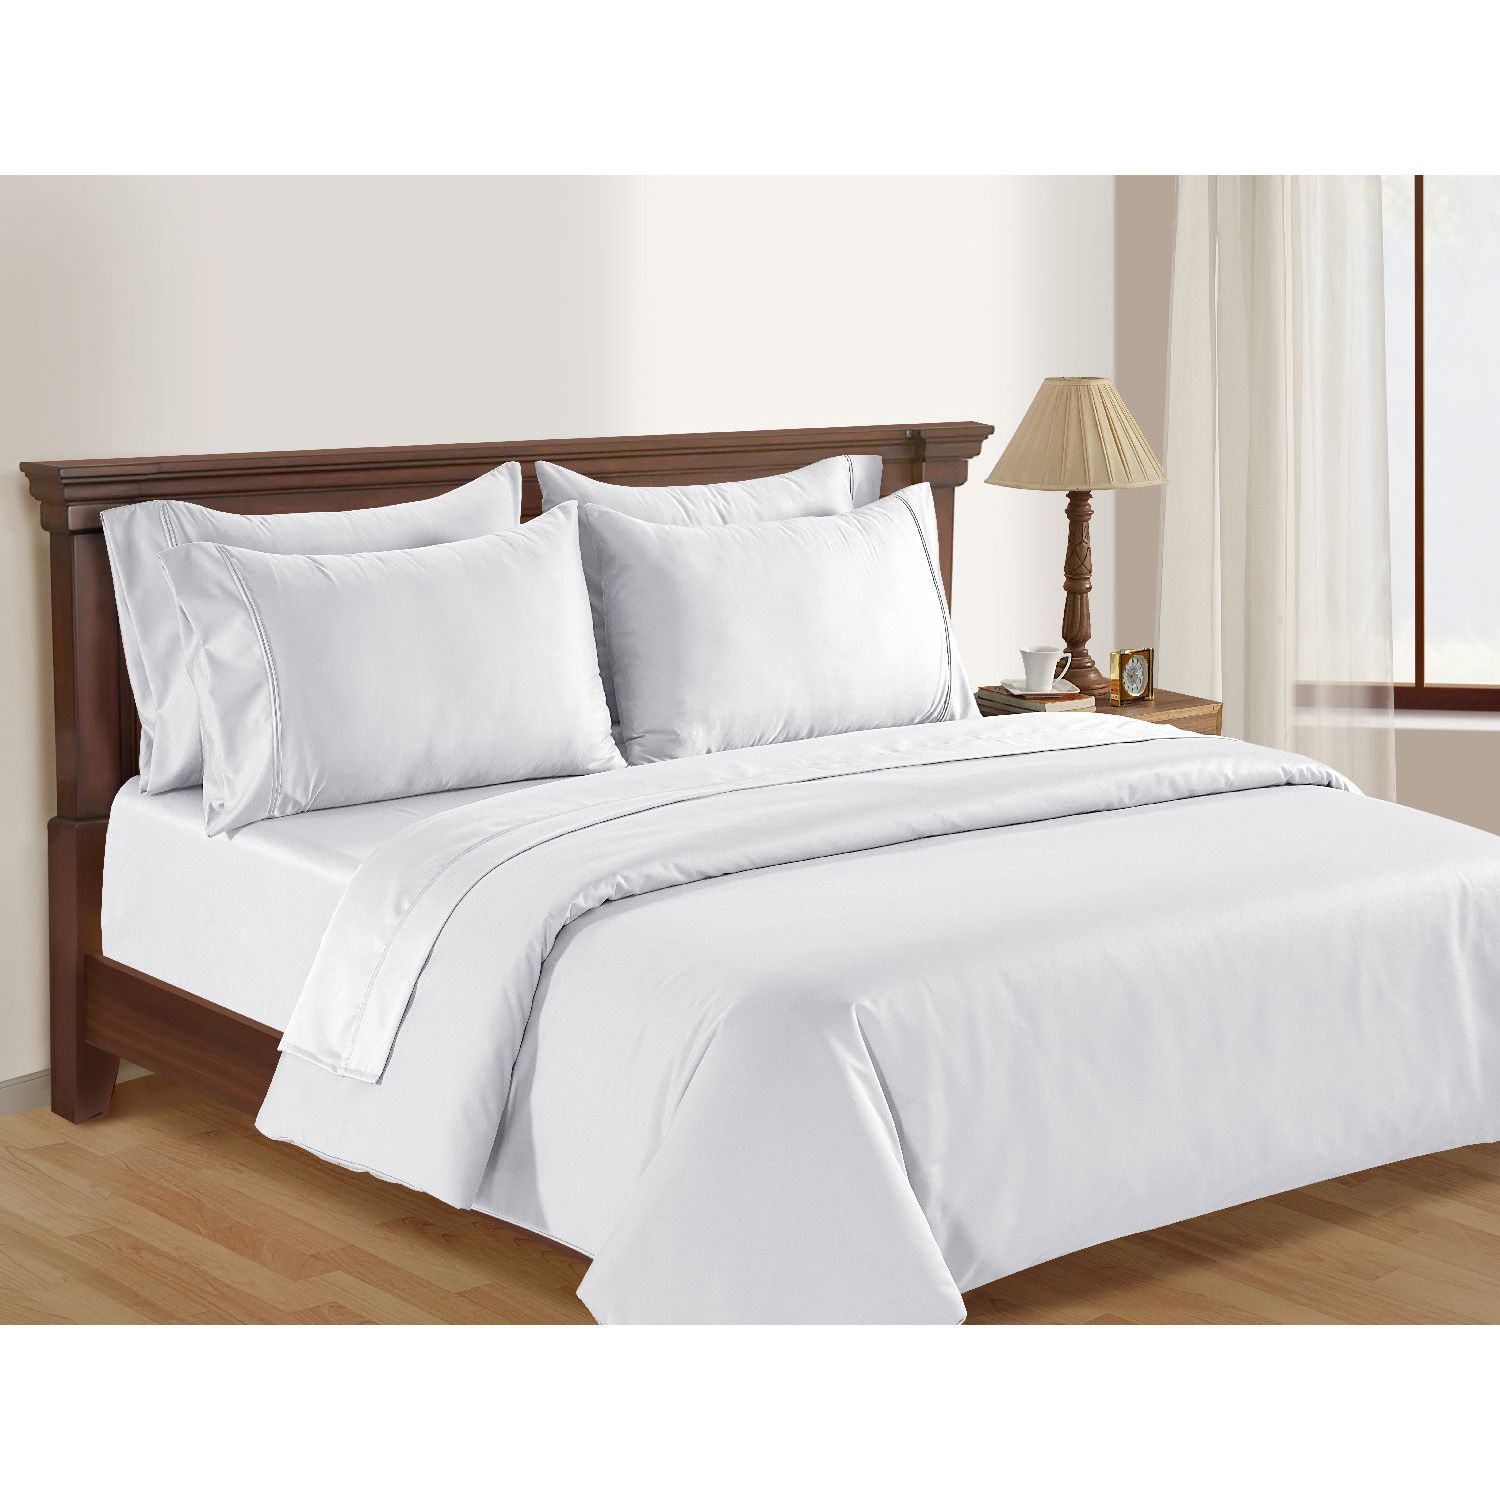 Hotel Premier Collection Egyptian Cotton Duvet Set by Member’s Mark, 650-Thread-Count